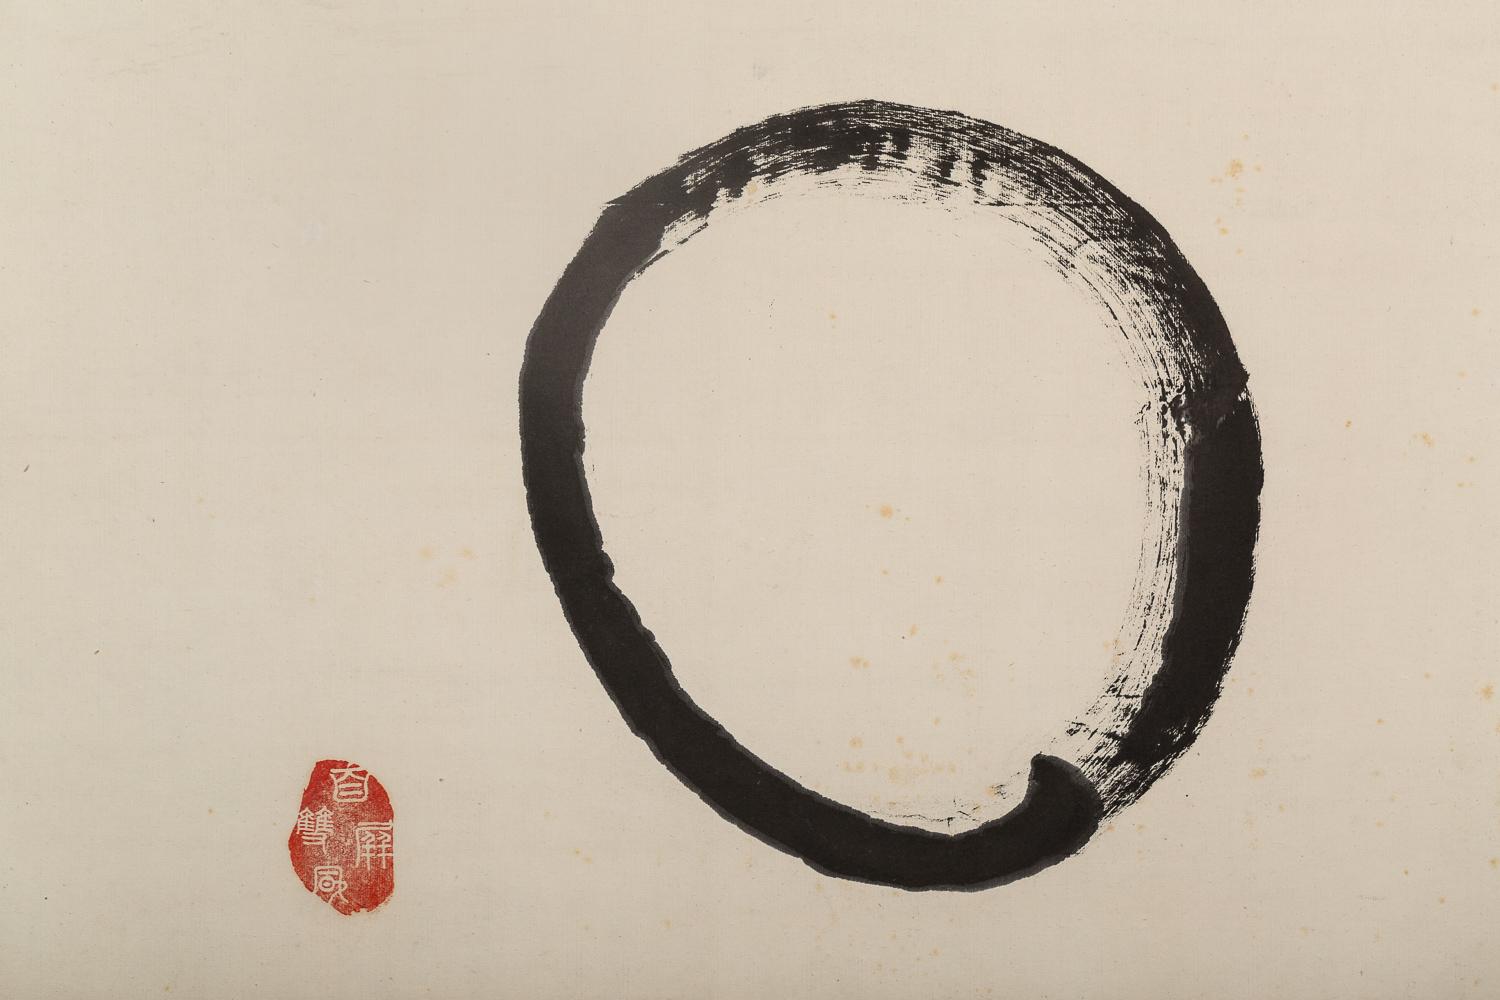 Enso translates to circle, but is a theme in zen calligraphy symbolizing enlightenment and the universe. Furosaki screen, or tea screen, painted by Sohan Gempo (shoun). Calligraphy reads: Pristine blue, marking of the sea/ Cleanly pure simplicity /